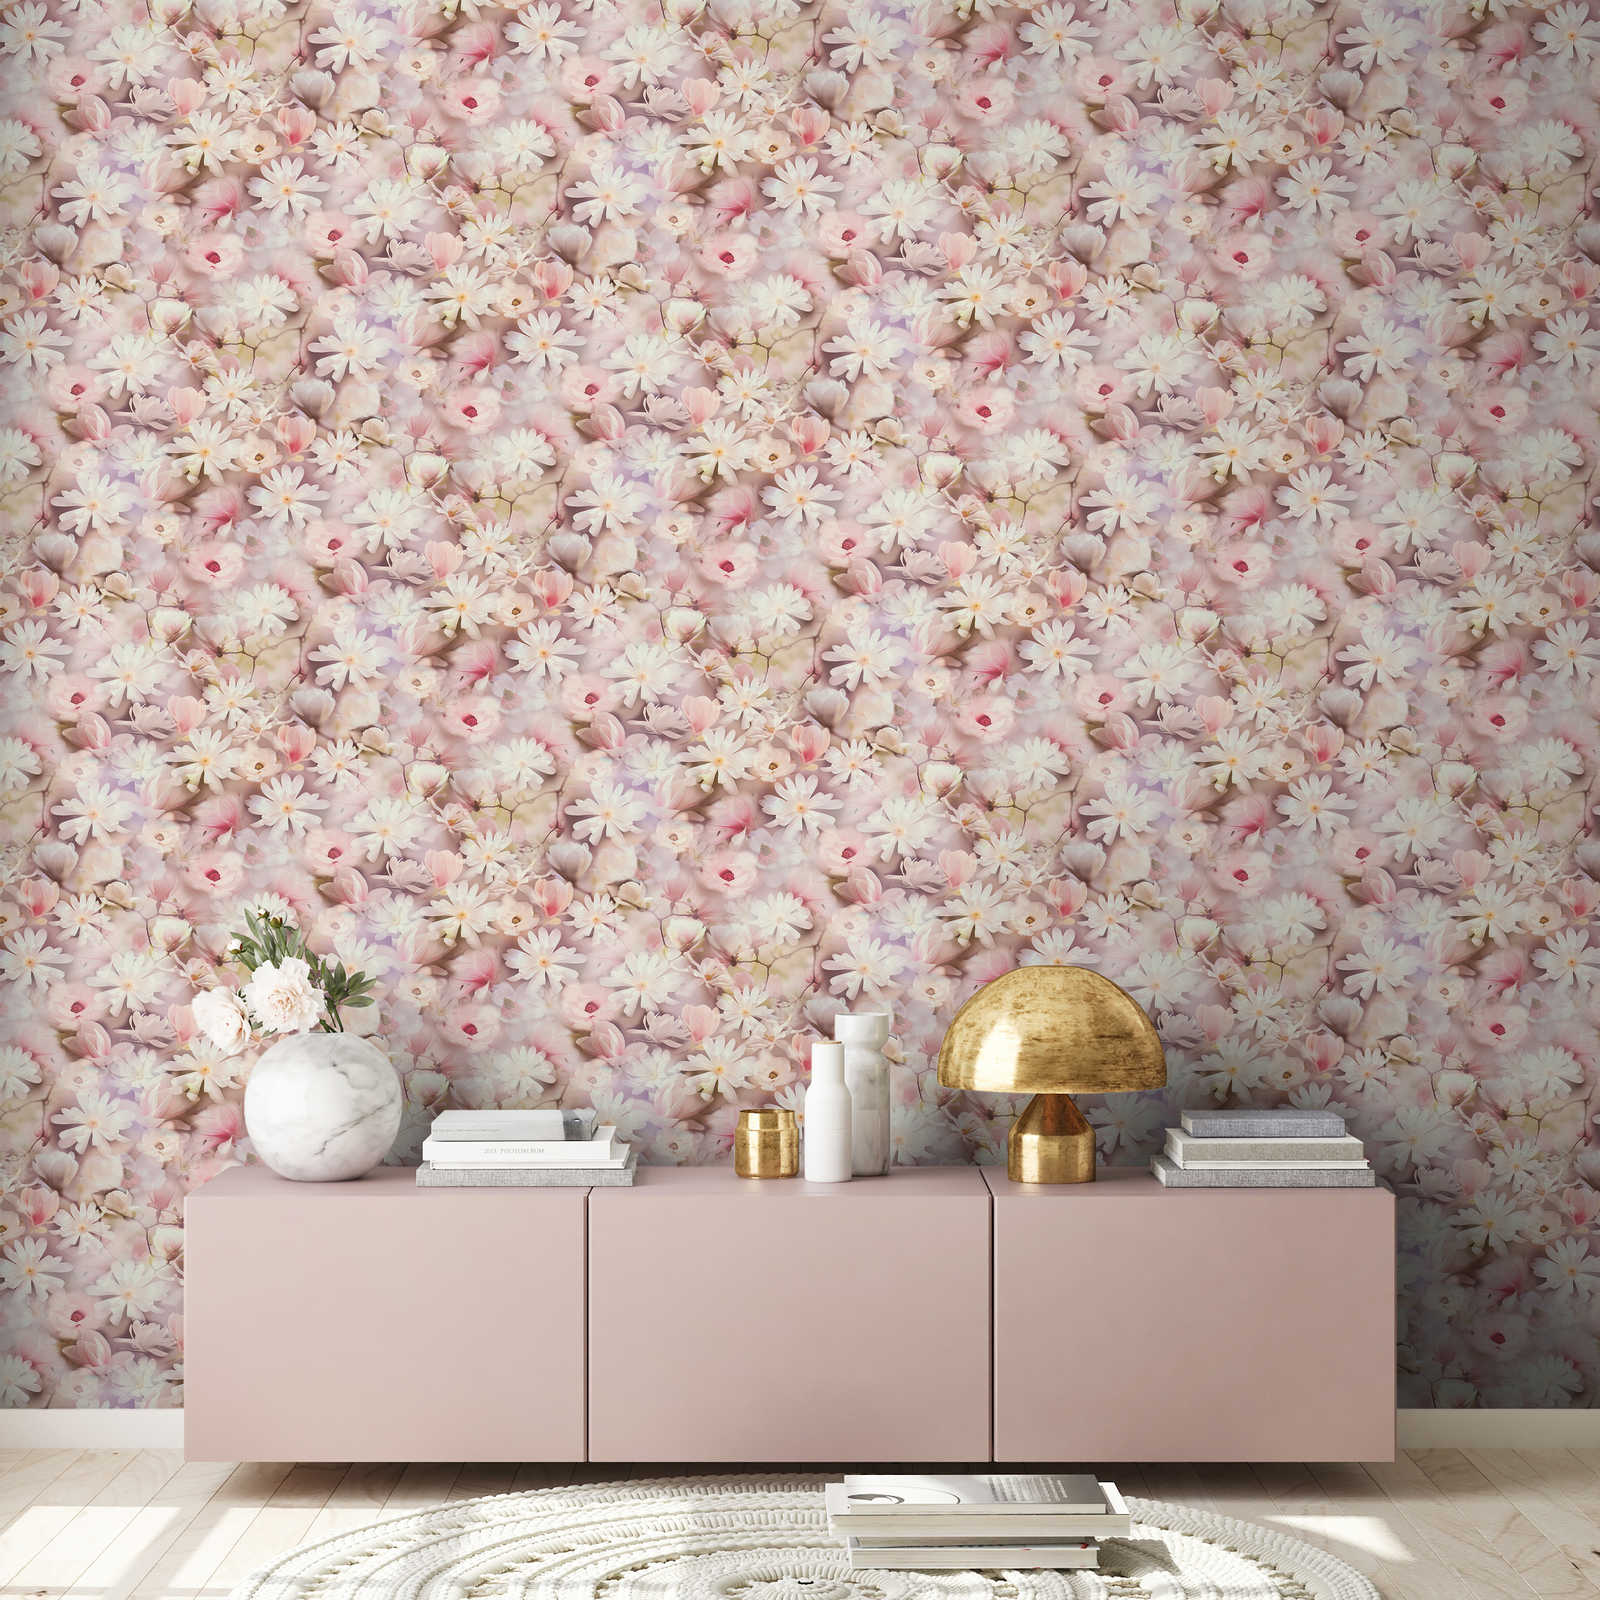             Floral wallpaper collage design in pink and white
        